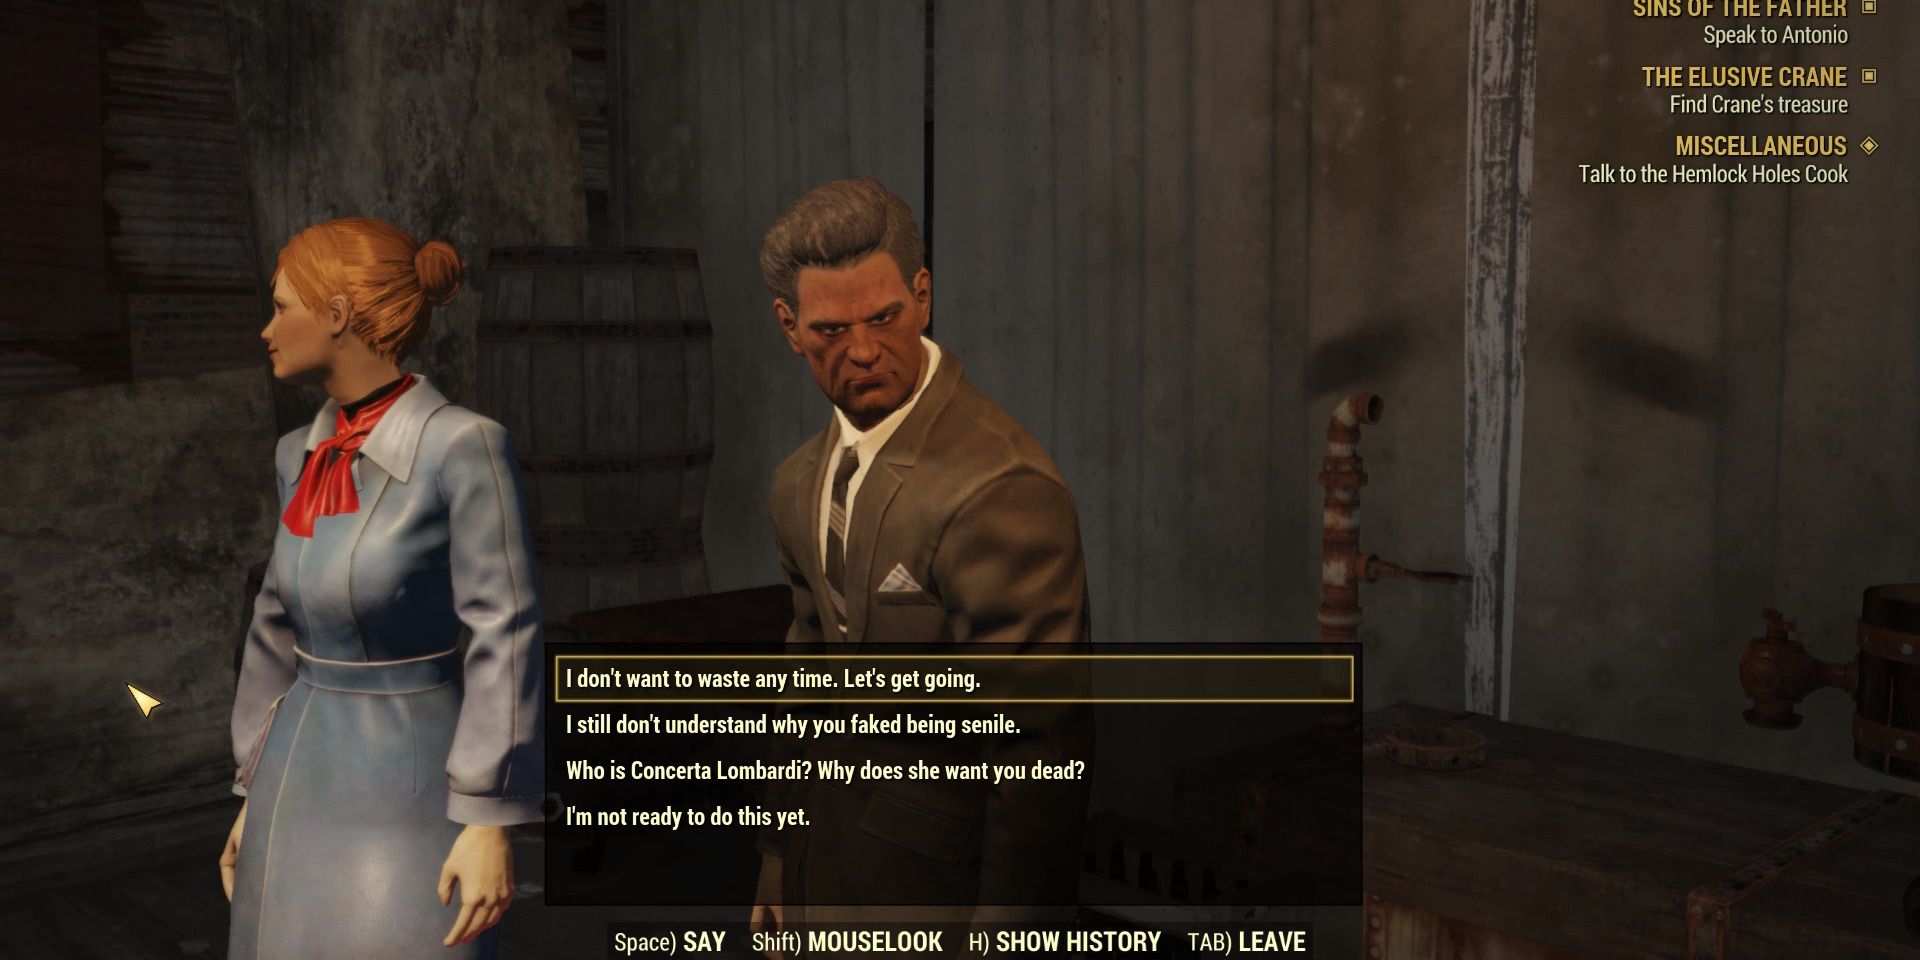 Image of Antonio at the start of Sins of the Father quest in Fallout 76